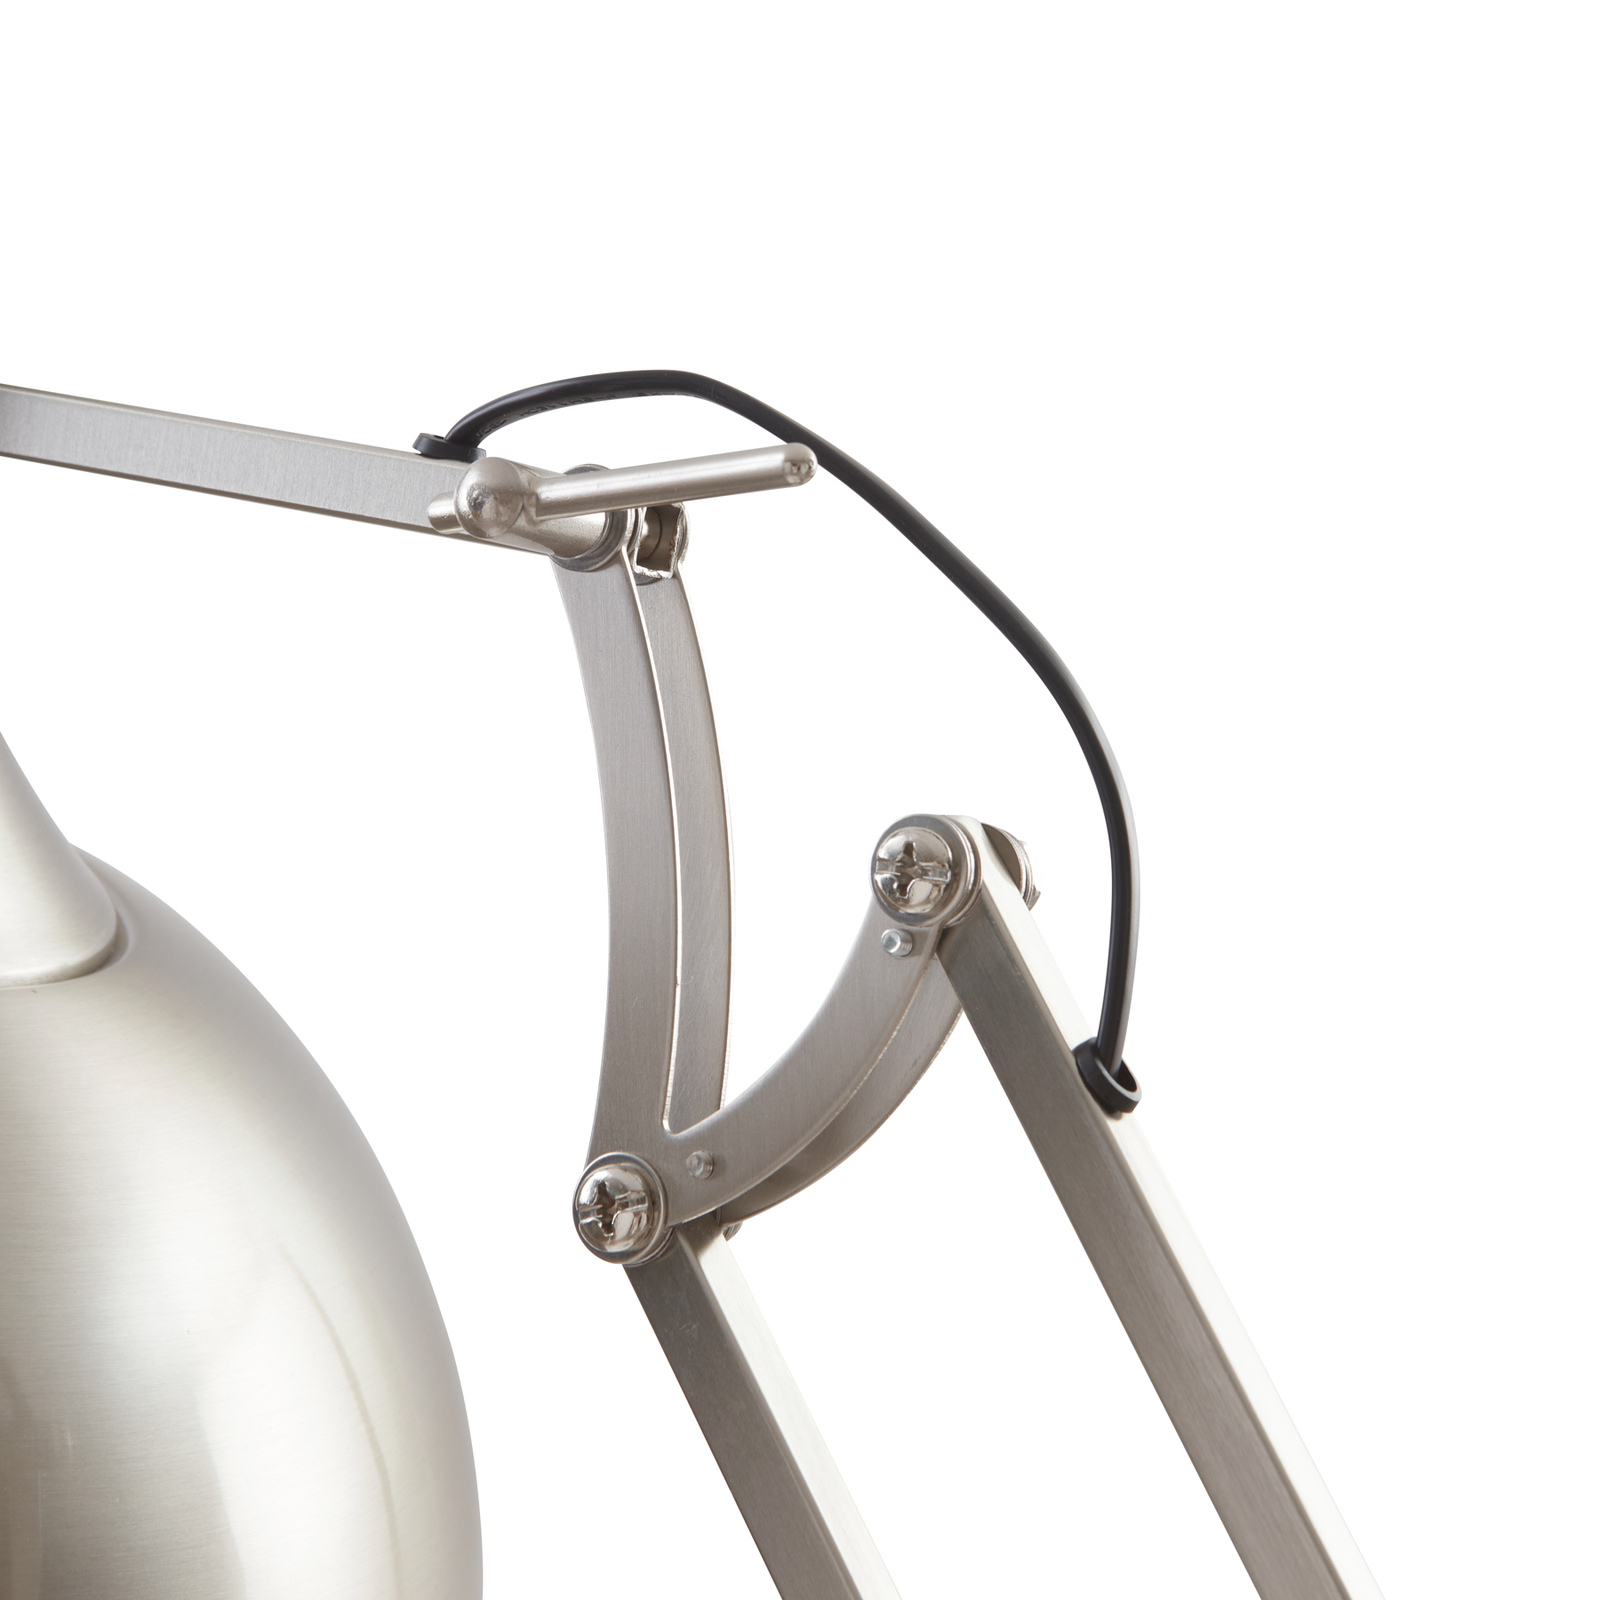 Lindby floor lamp Leia, silver, swivelling lampshade